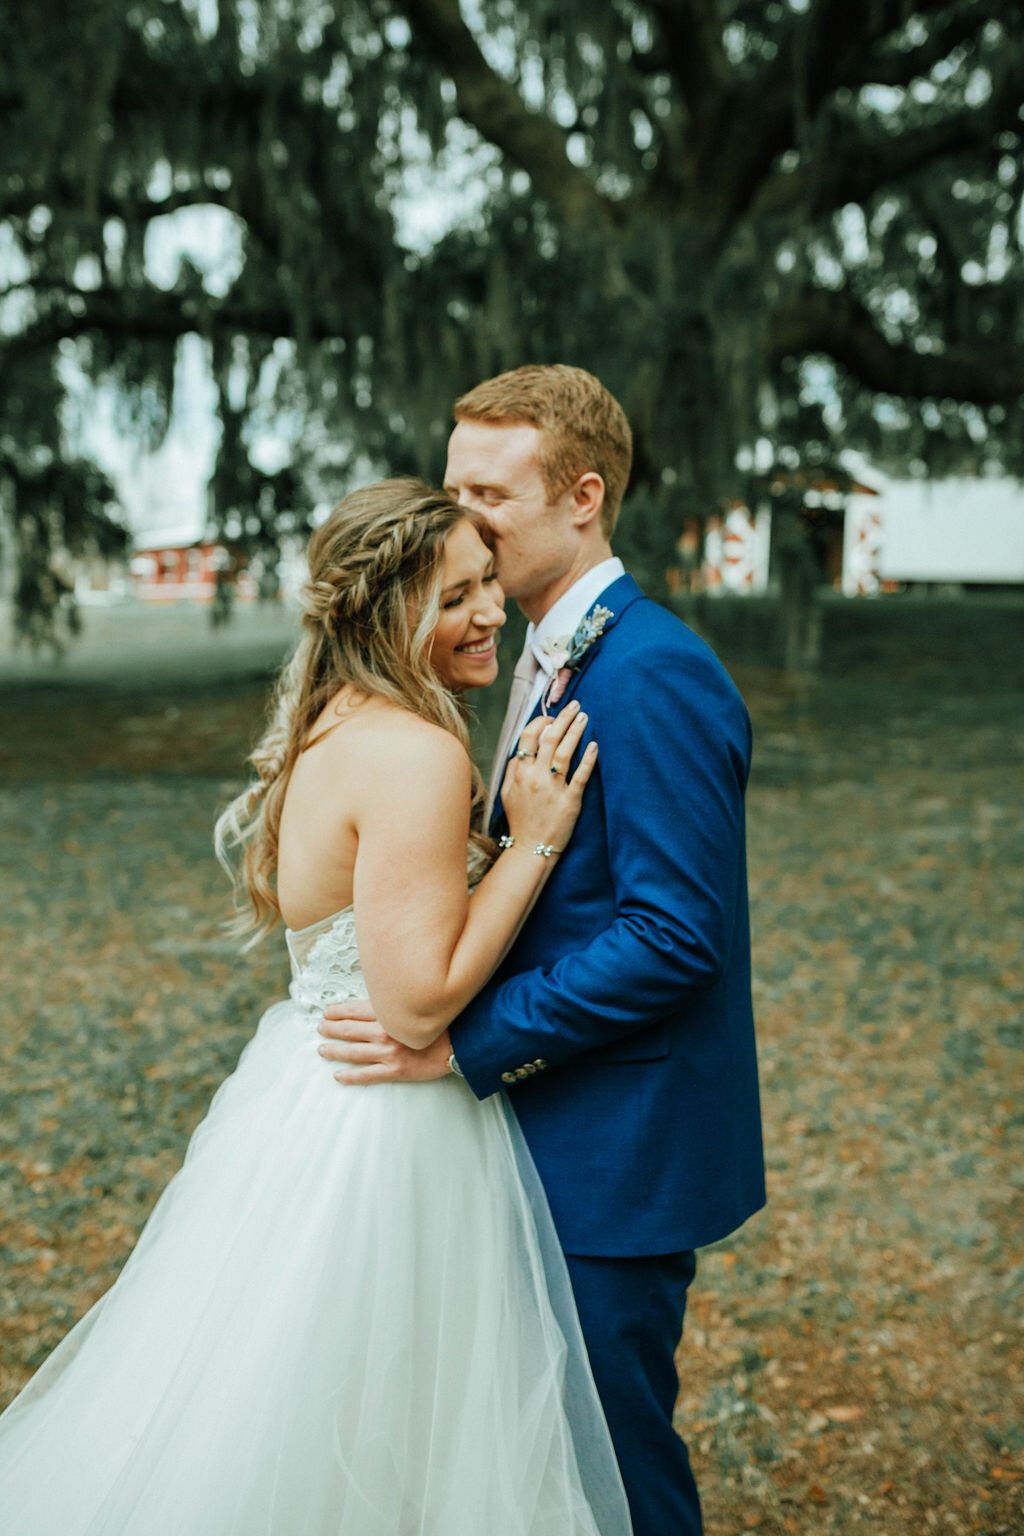 ivory-and-beau-dresses-savannah-bridal-boutique-savannah-bridal-shop-wedding-dresses-bride-bridal-shopping-bridal-shop-engaged-wedding-boutique-down-for-the-gown-baylee-blush-by-hayley-paige--wedding-dress-i-and-b-bride-IMG_0538.jpg